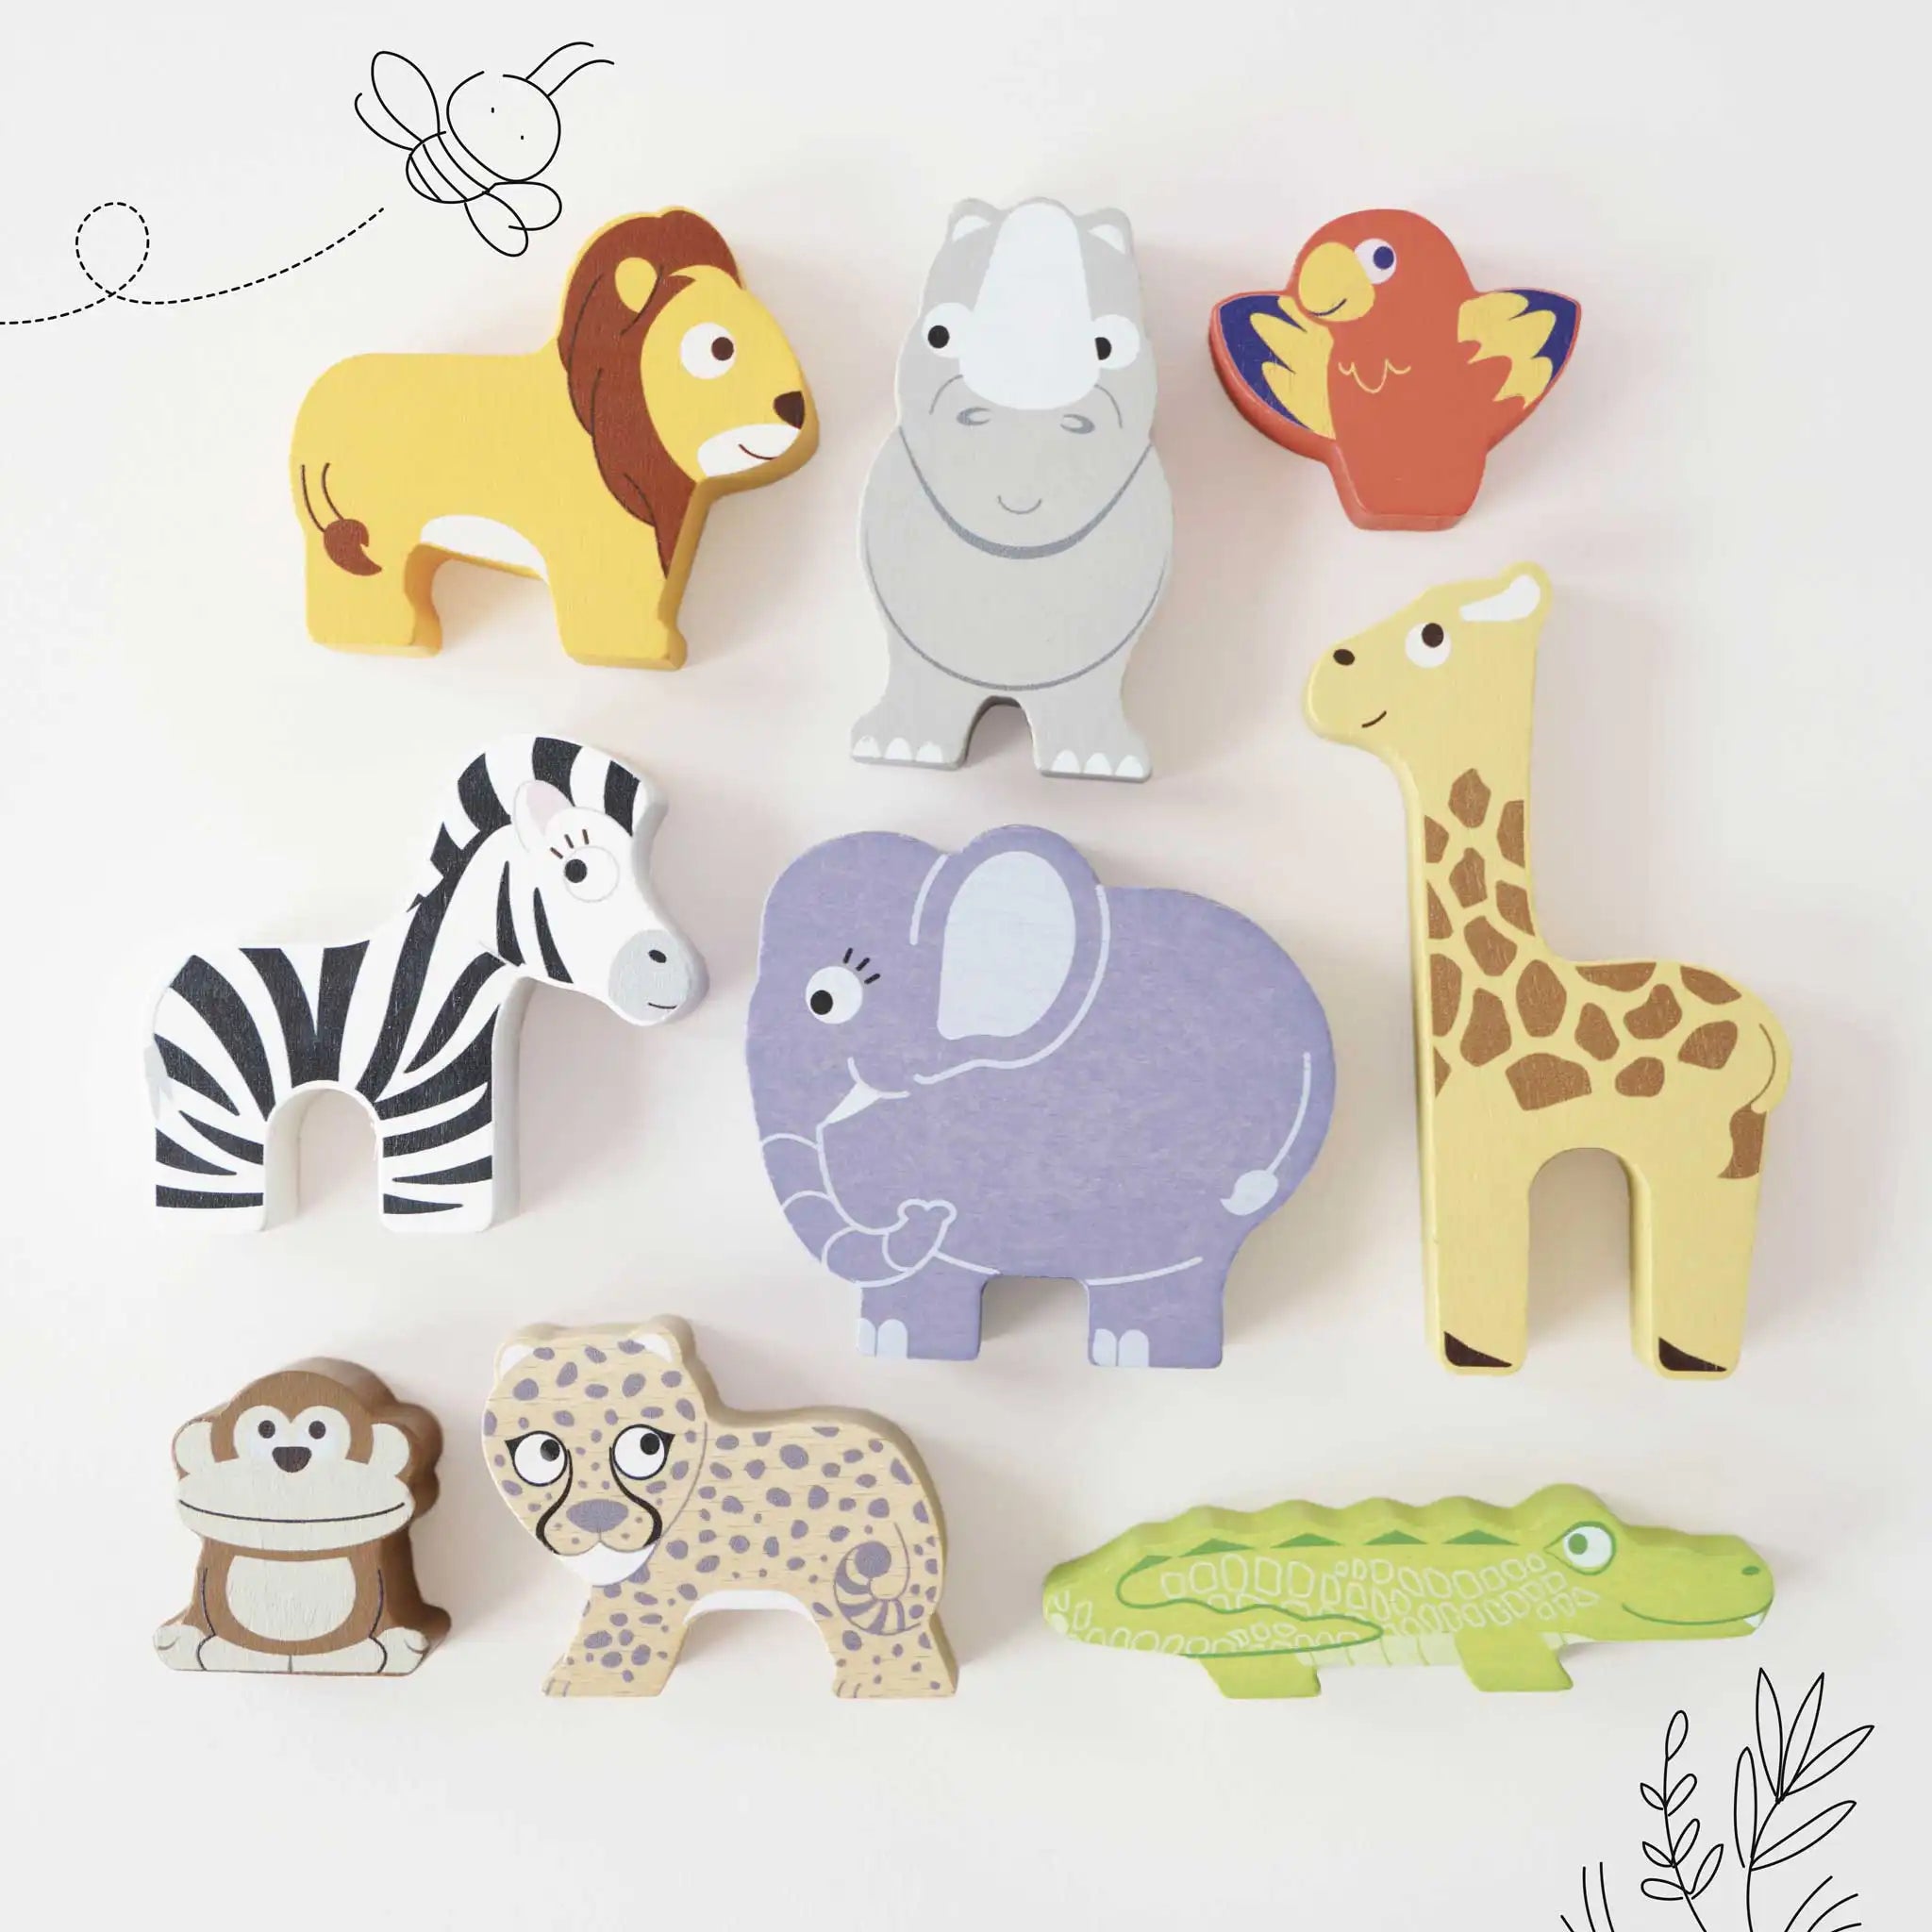 Africa Wooden Animal Stacking Toy